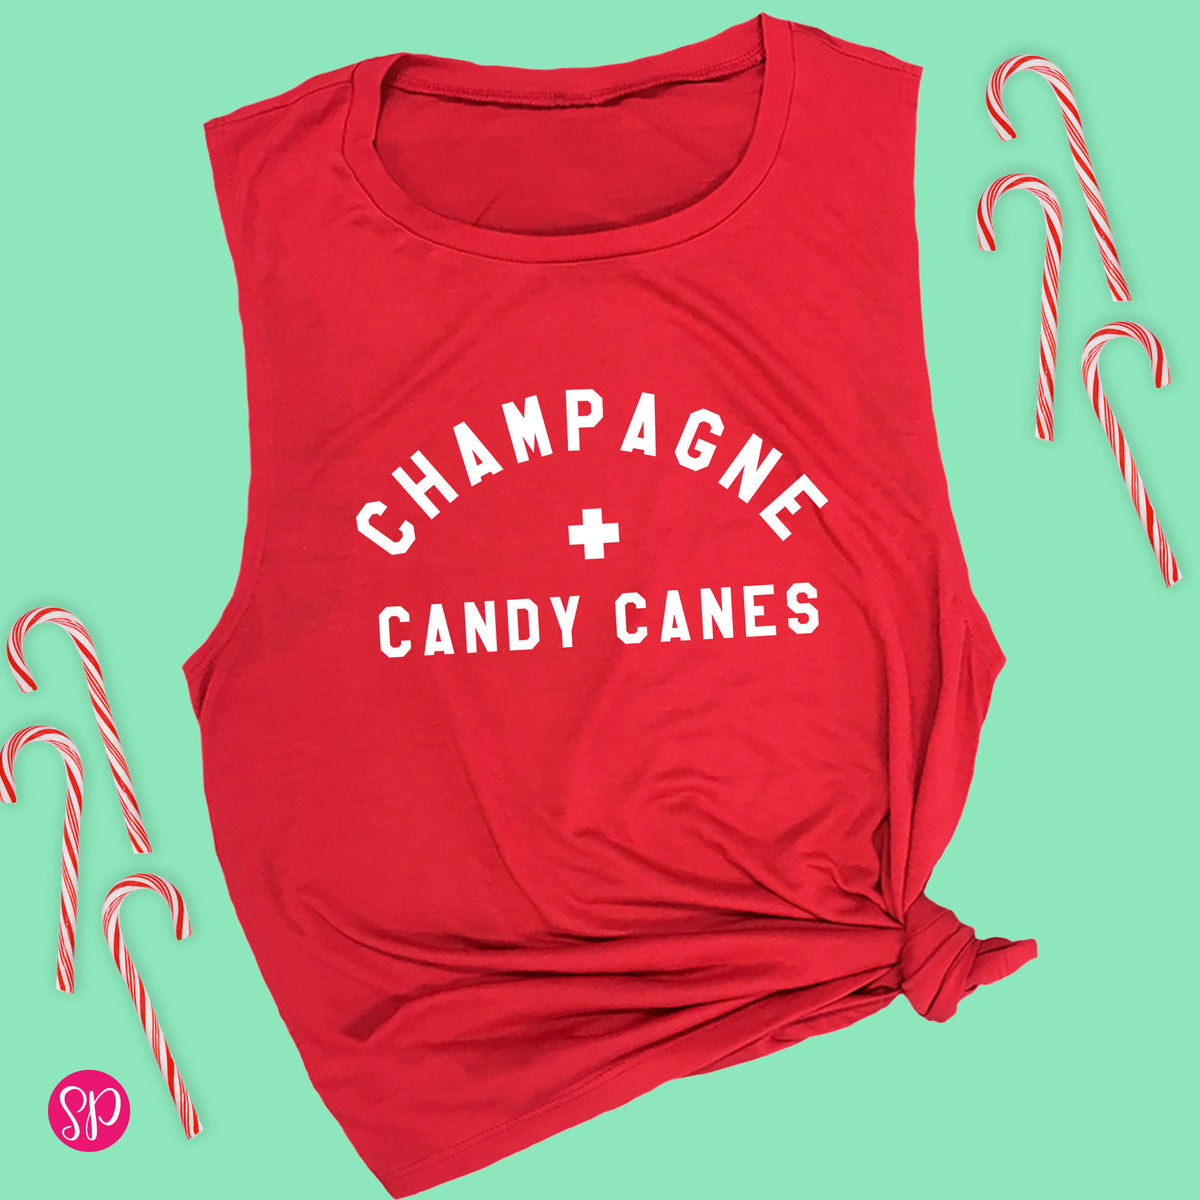 Champagne and Candy Canes Christmas Workout Tank Top for Women